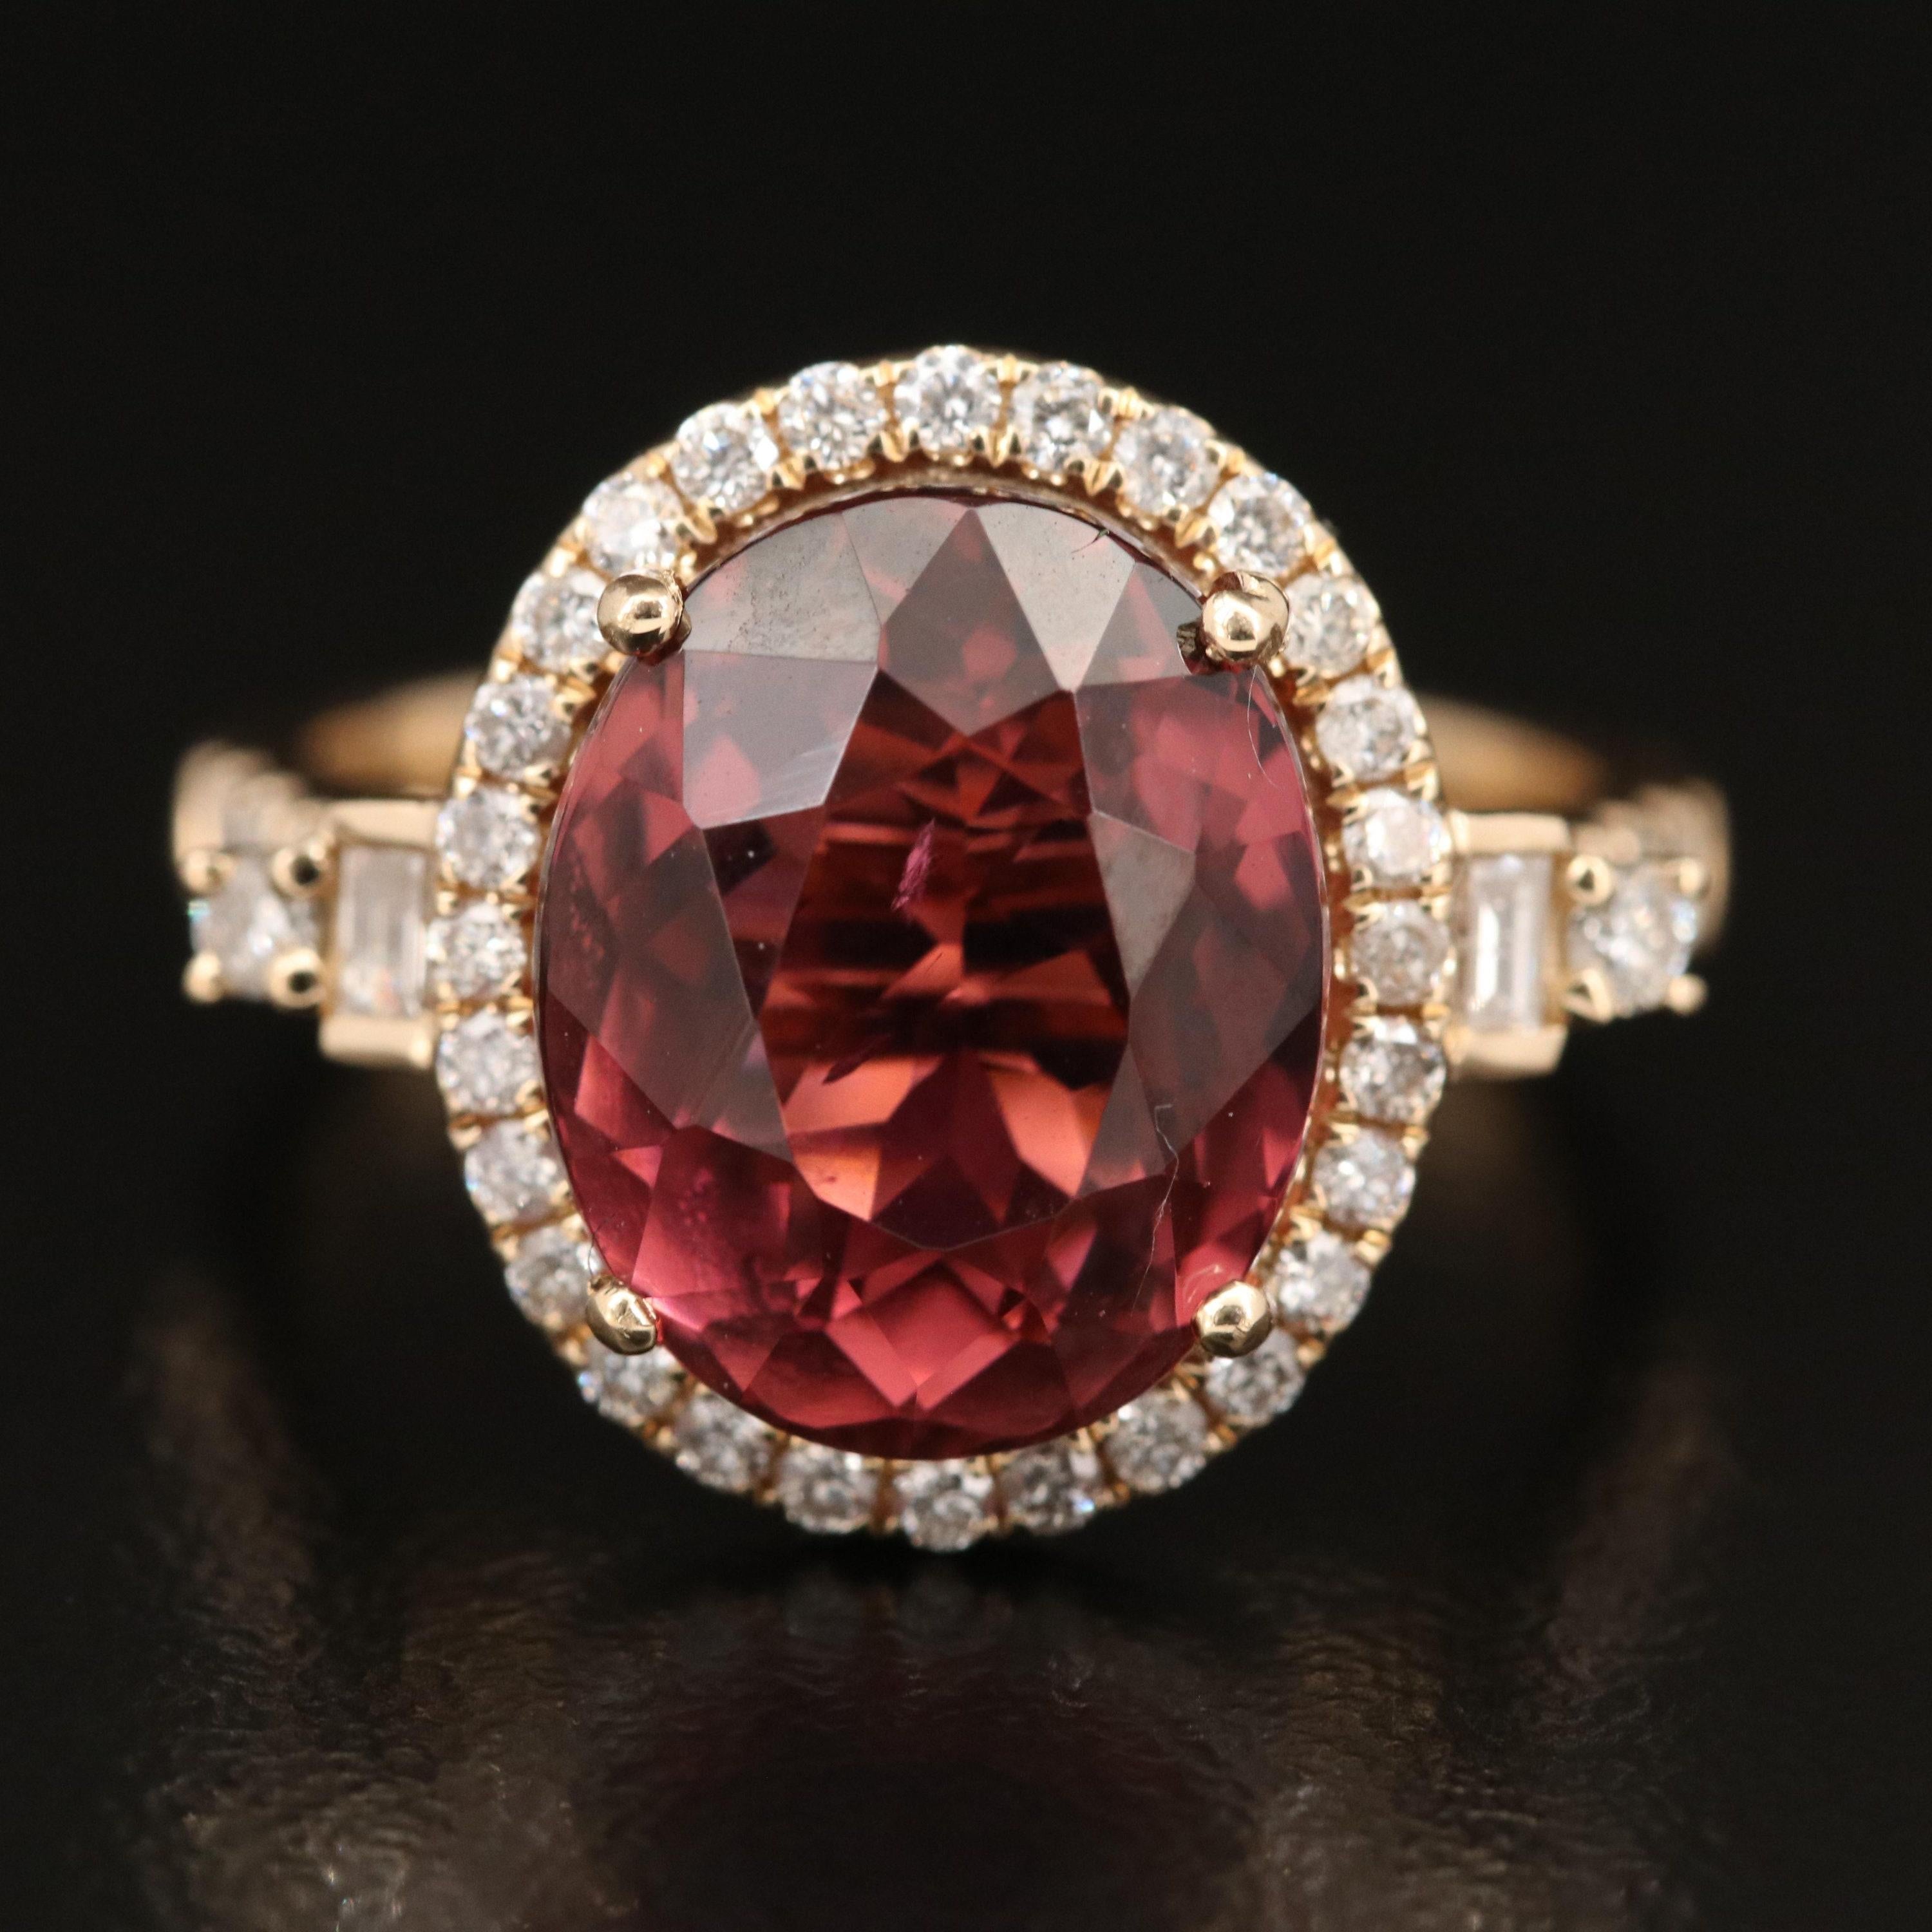 For Sale:  6.3 Carat Oval Cut Rubellite Tourmaline Bridal Promise Ring Halo Tourmaline Ring 6